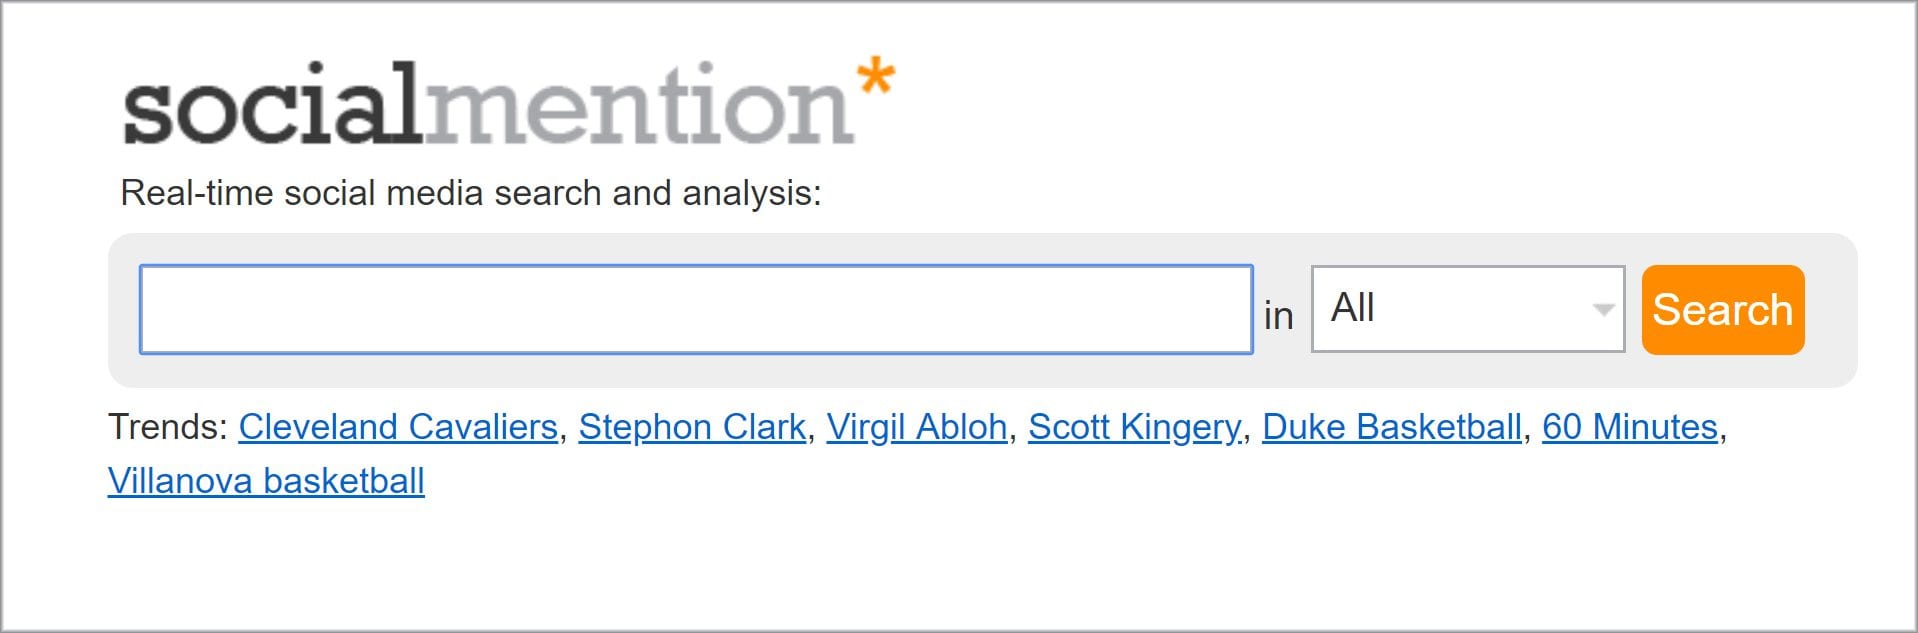 Screen capture of "Social Mention" website search interface